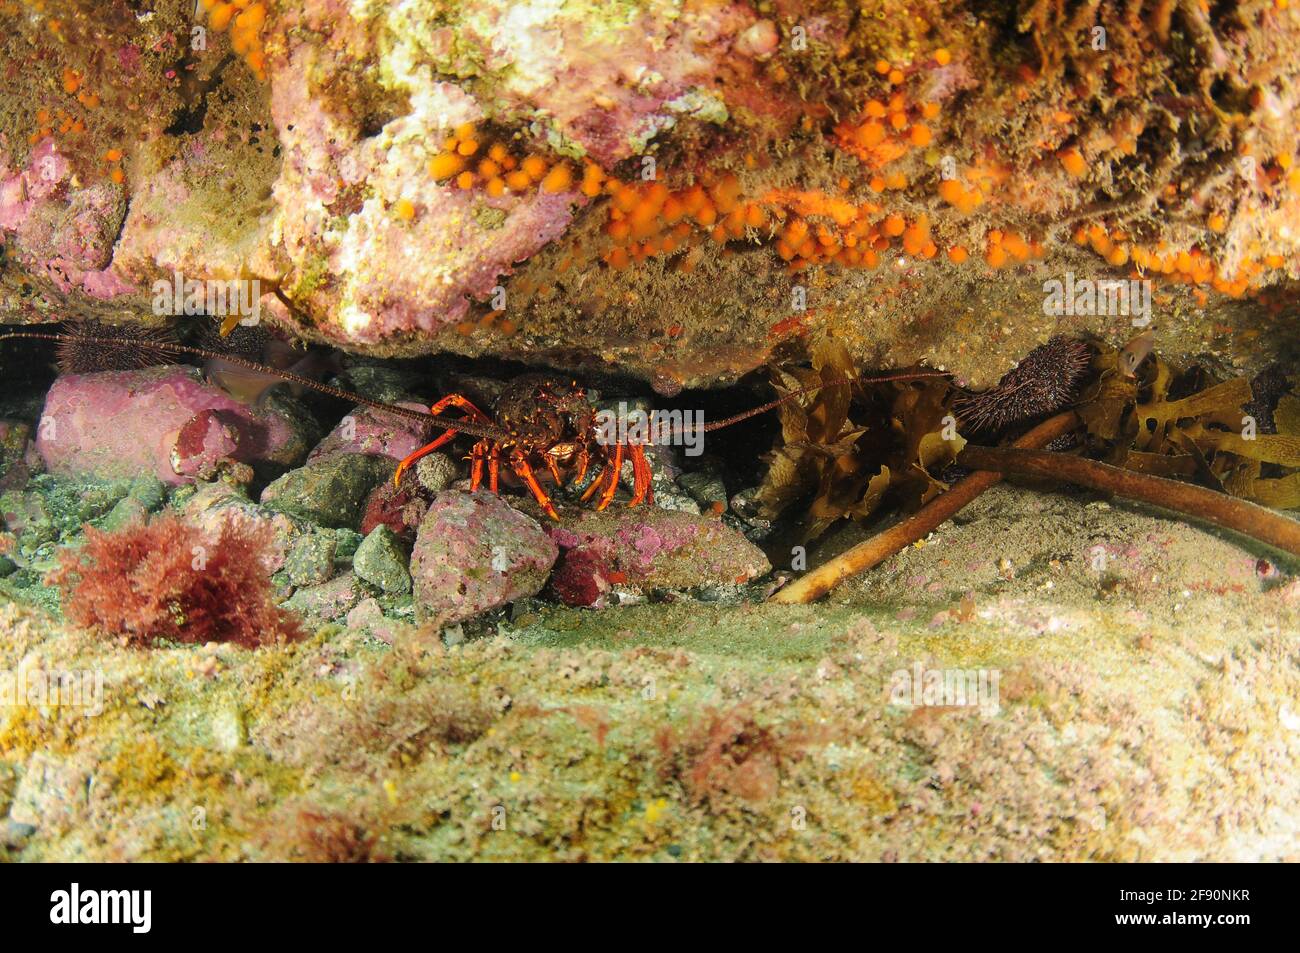 Spiny rock lobster Jasus edwardsii hiding among rocks under wall overhang covered with invertebrates. Stock Photo